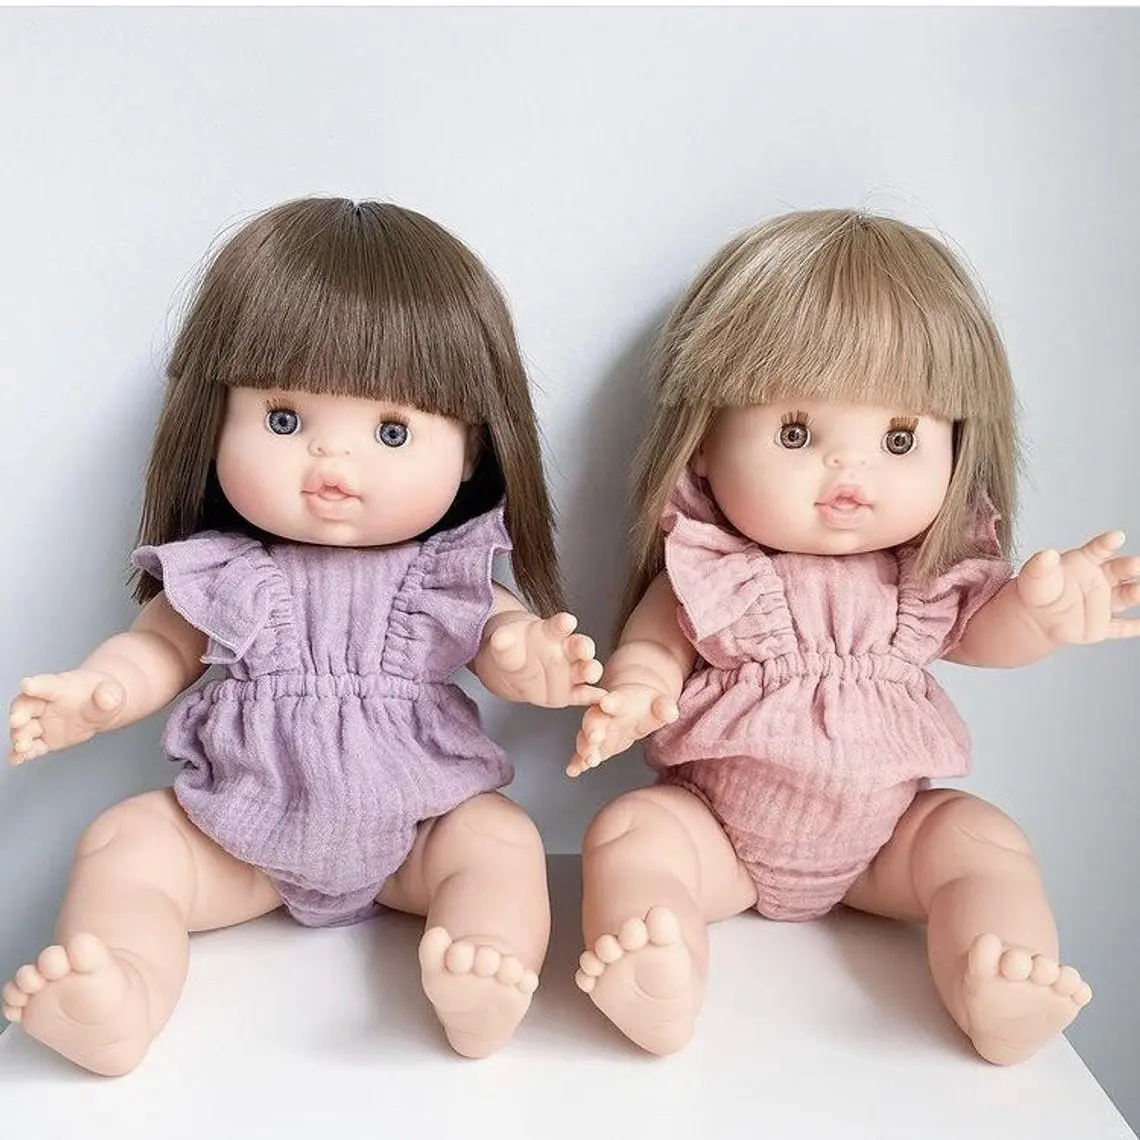 Dolly and me outfits 34cm Miniland Minikane linen romper doll clothes